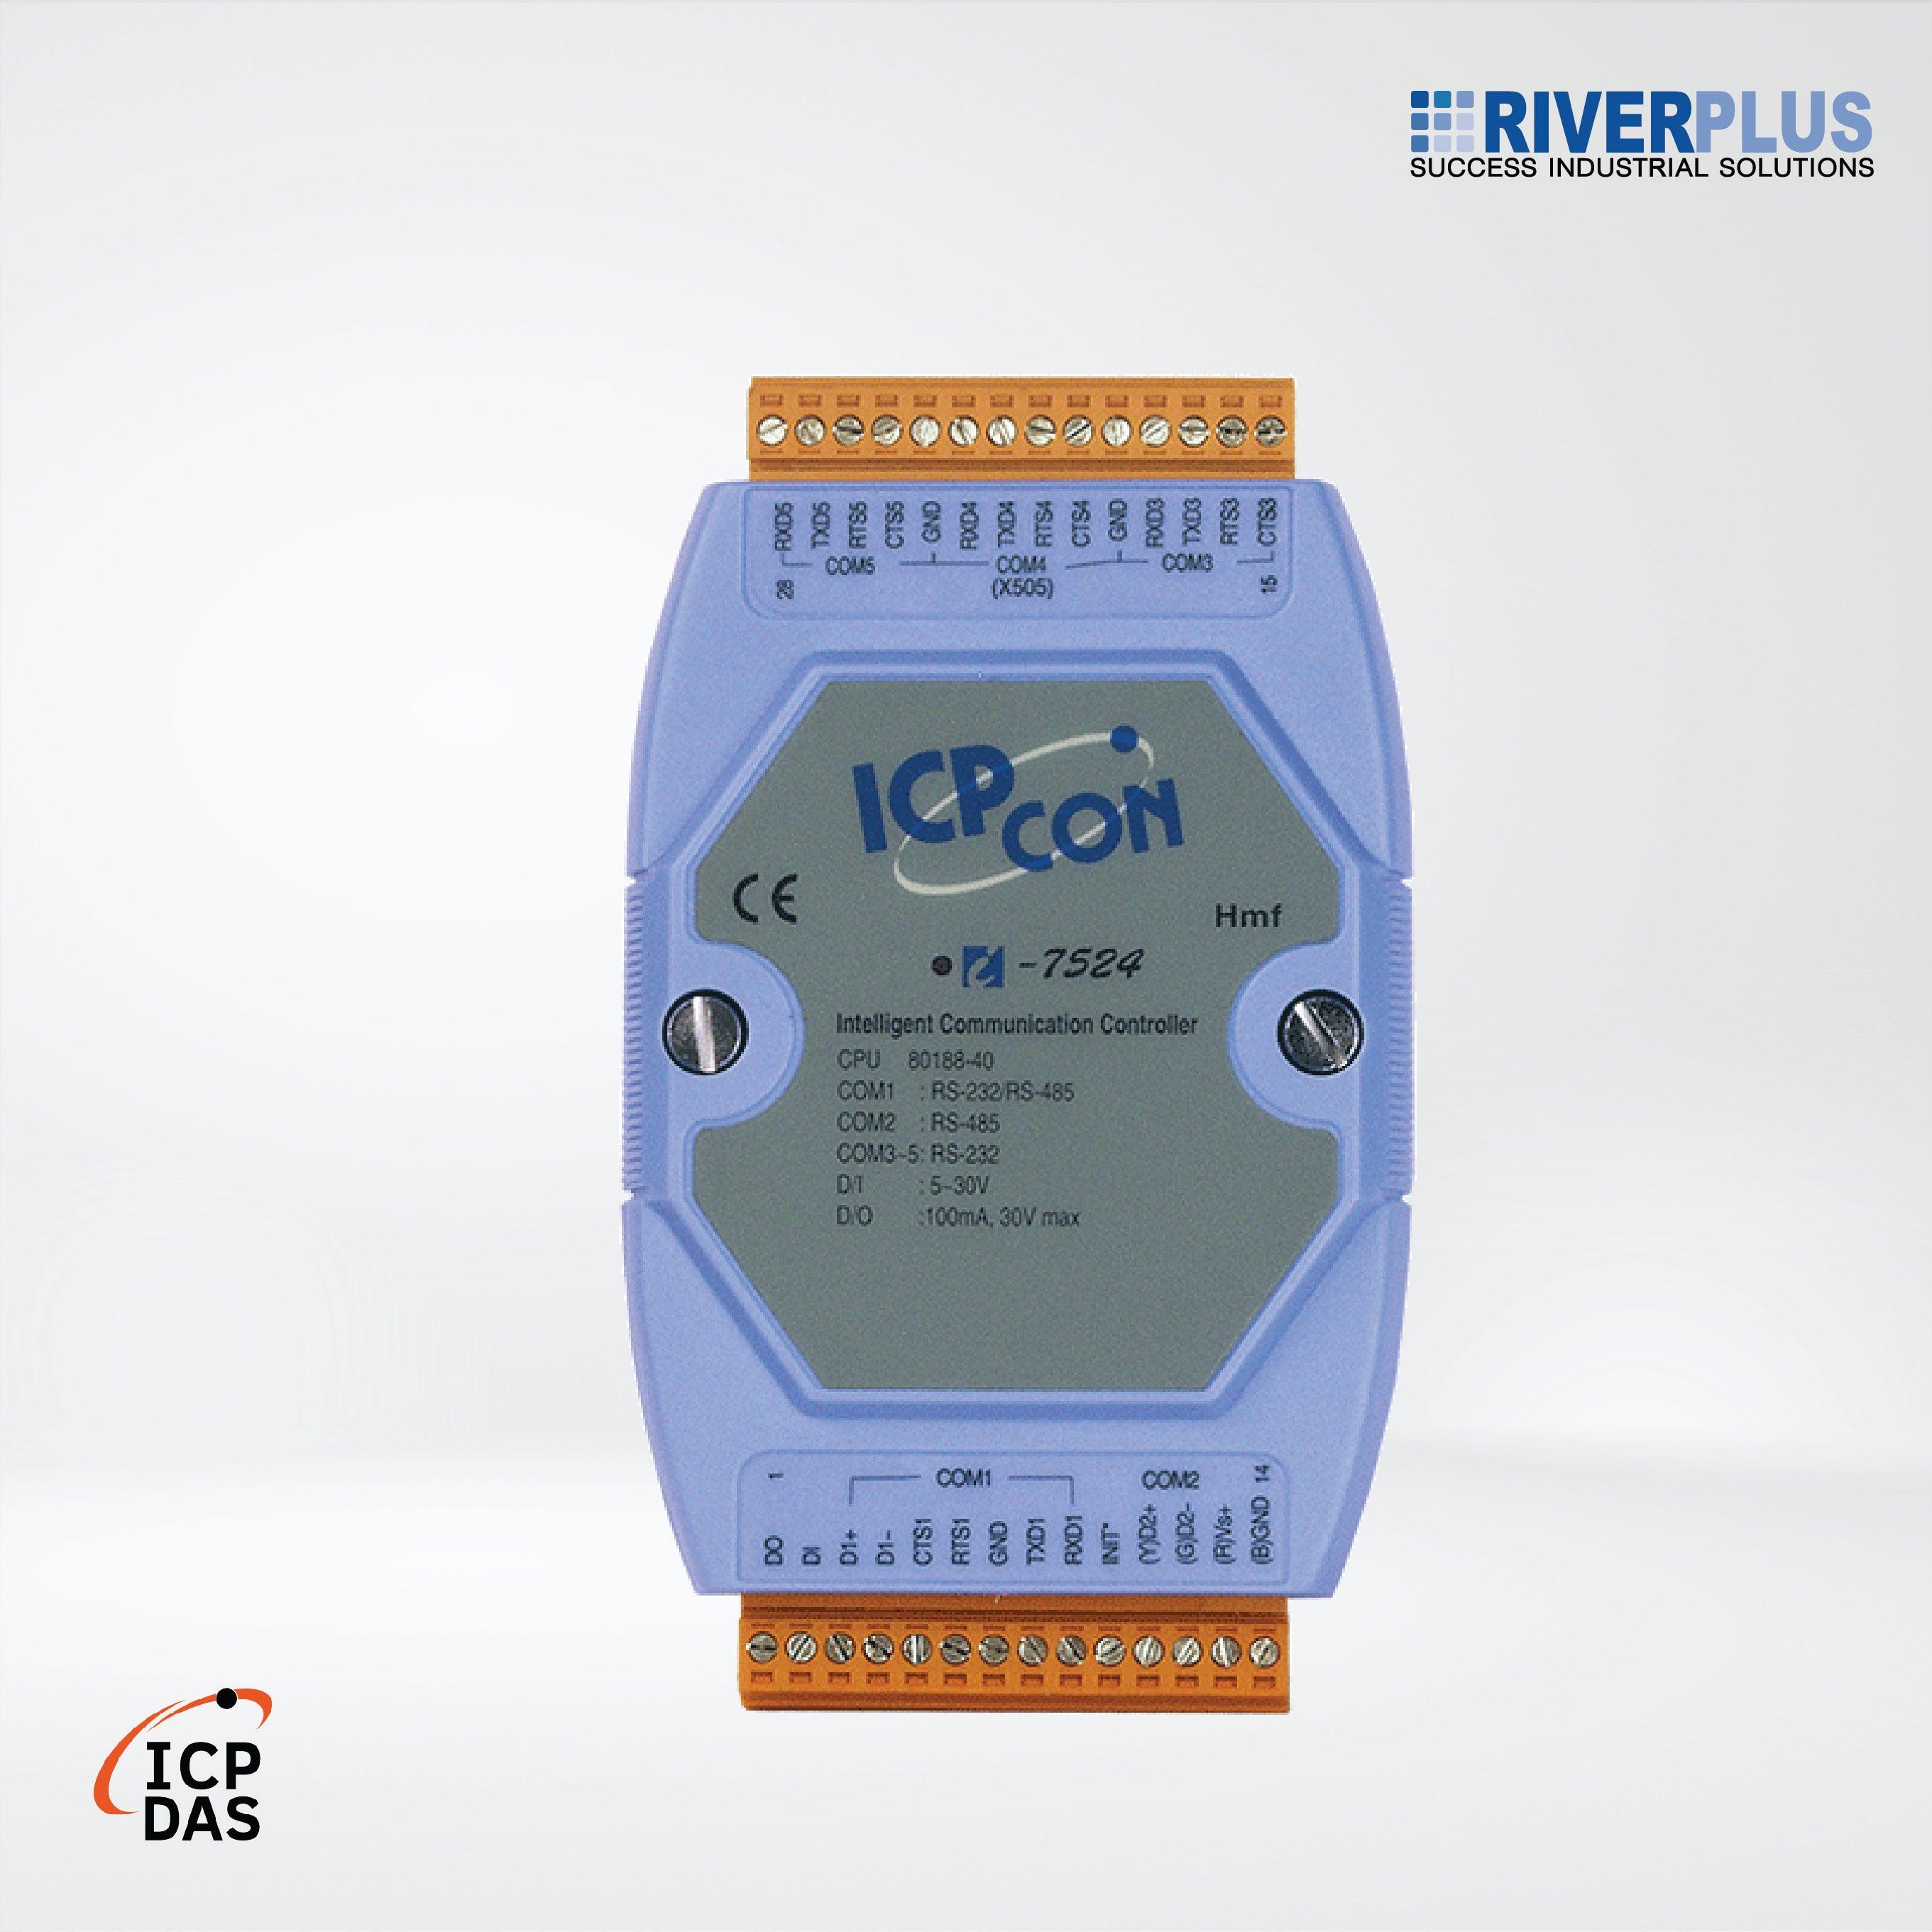 I-7524 Addressable RS-485 to 4 x RS-232/RS-485 Converter with 1 DI and 1 DO (Blue Cover) - Riverplus